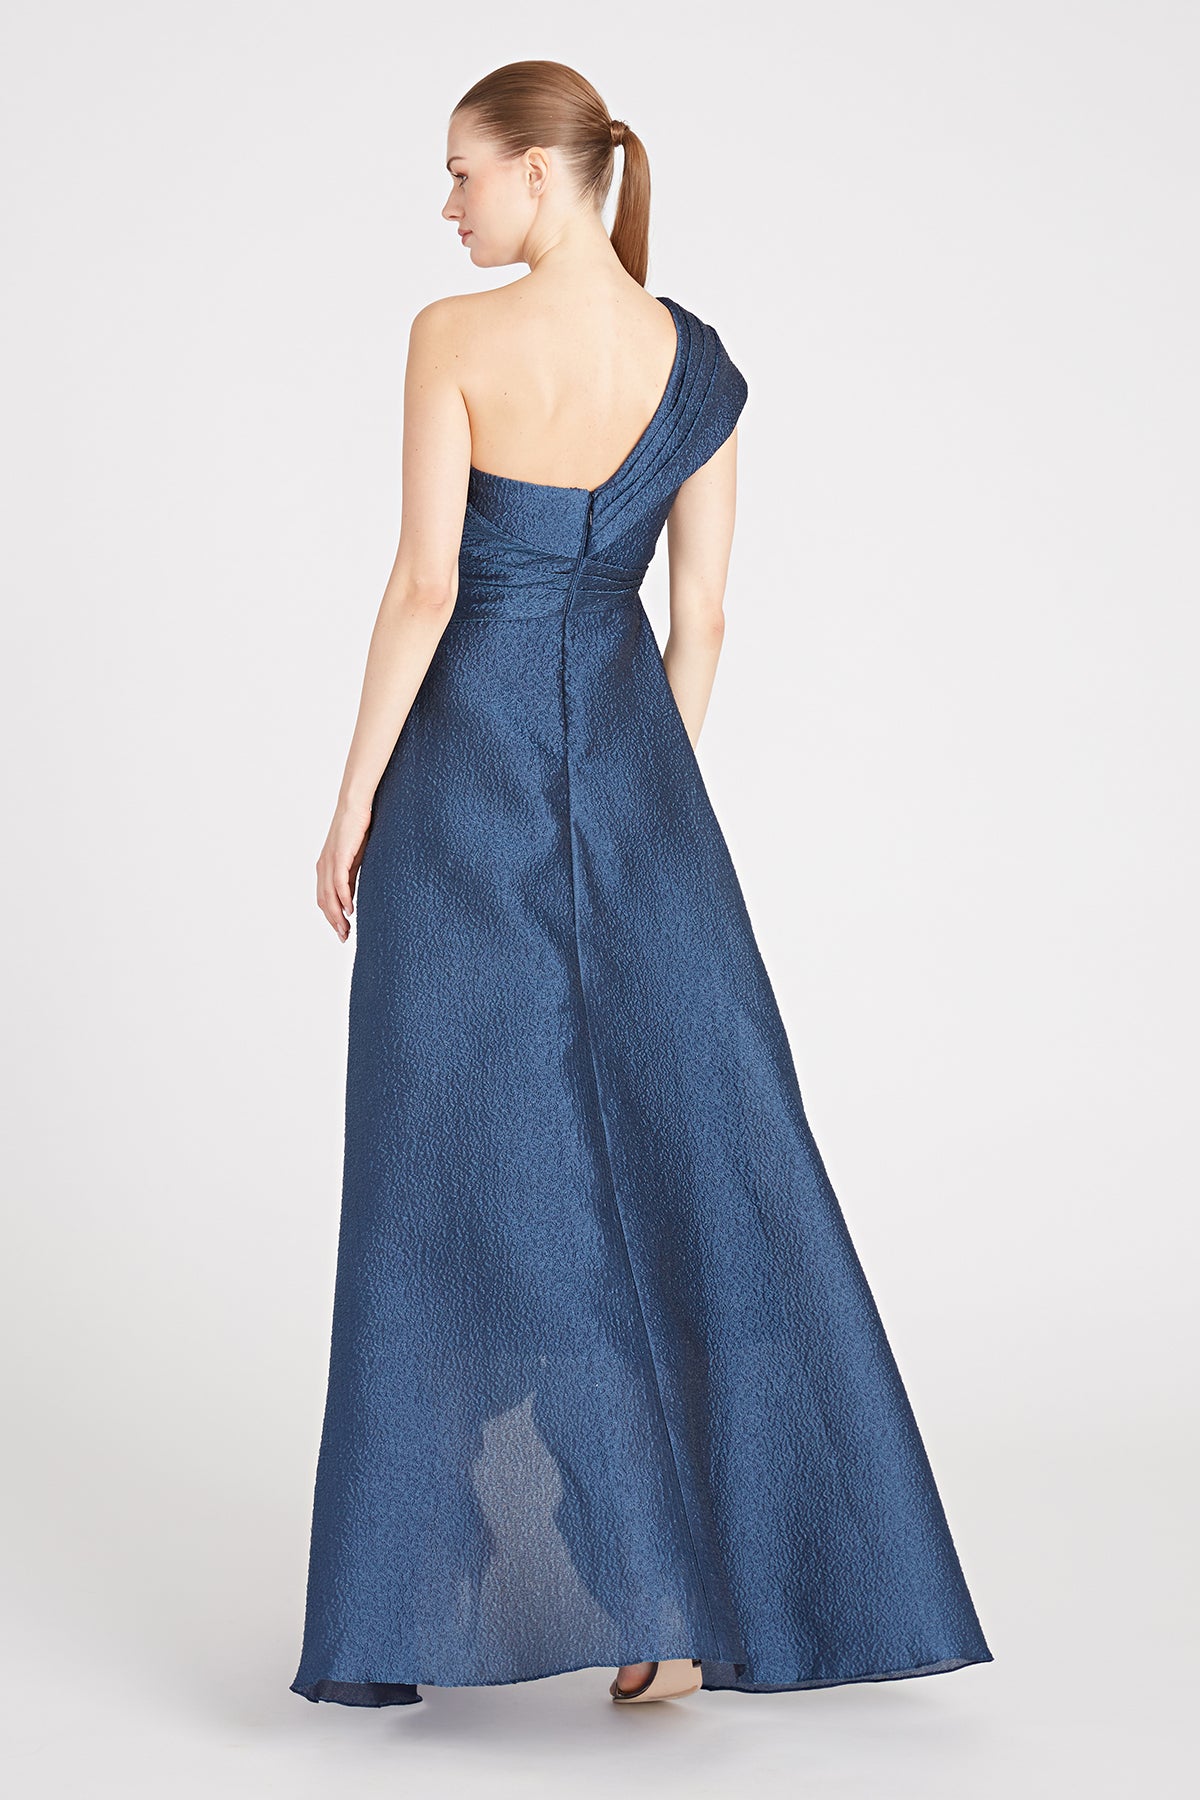 Edith High Low A Line Gown